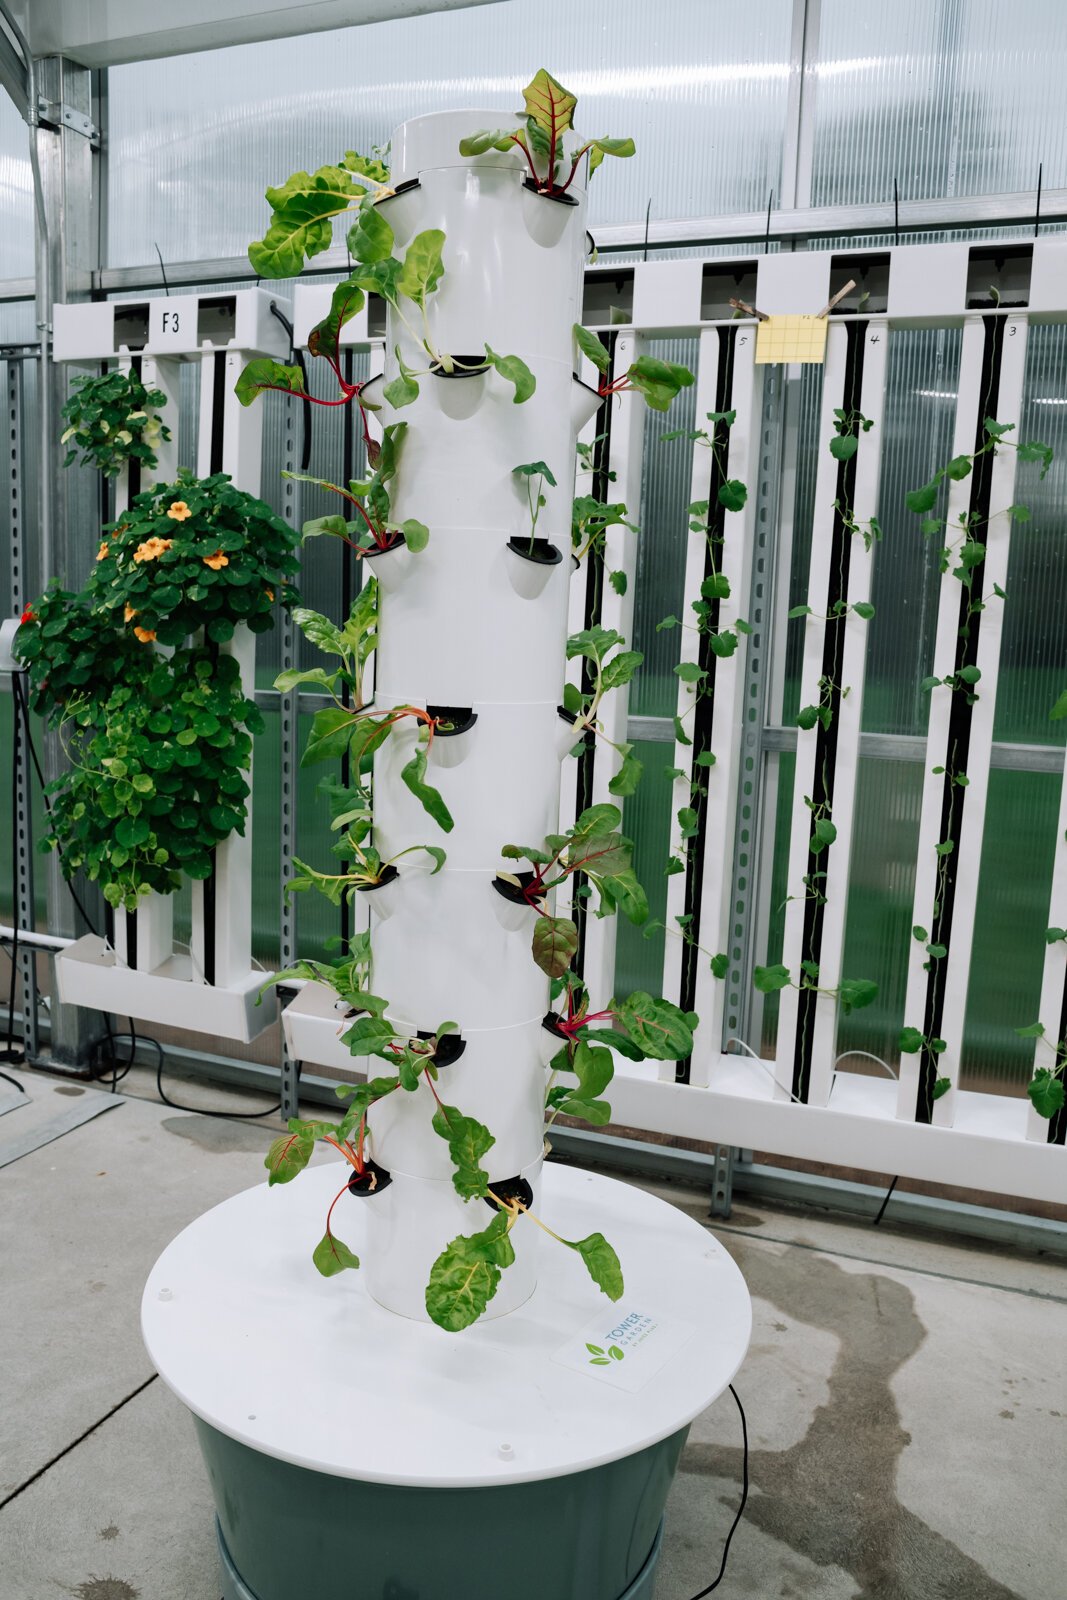 The Juice+ tower gardens at the Parkview Community Greenhouse are the same ones used in schools for the Farm to School program. They feature a variety of plants.